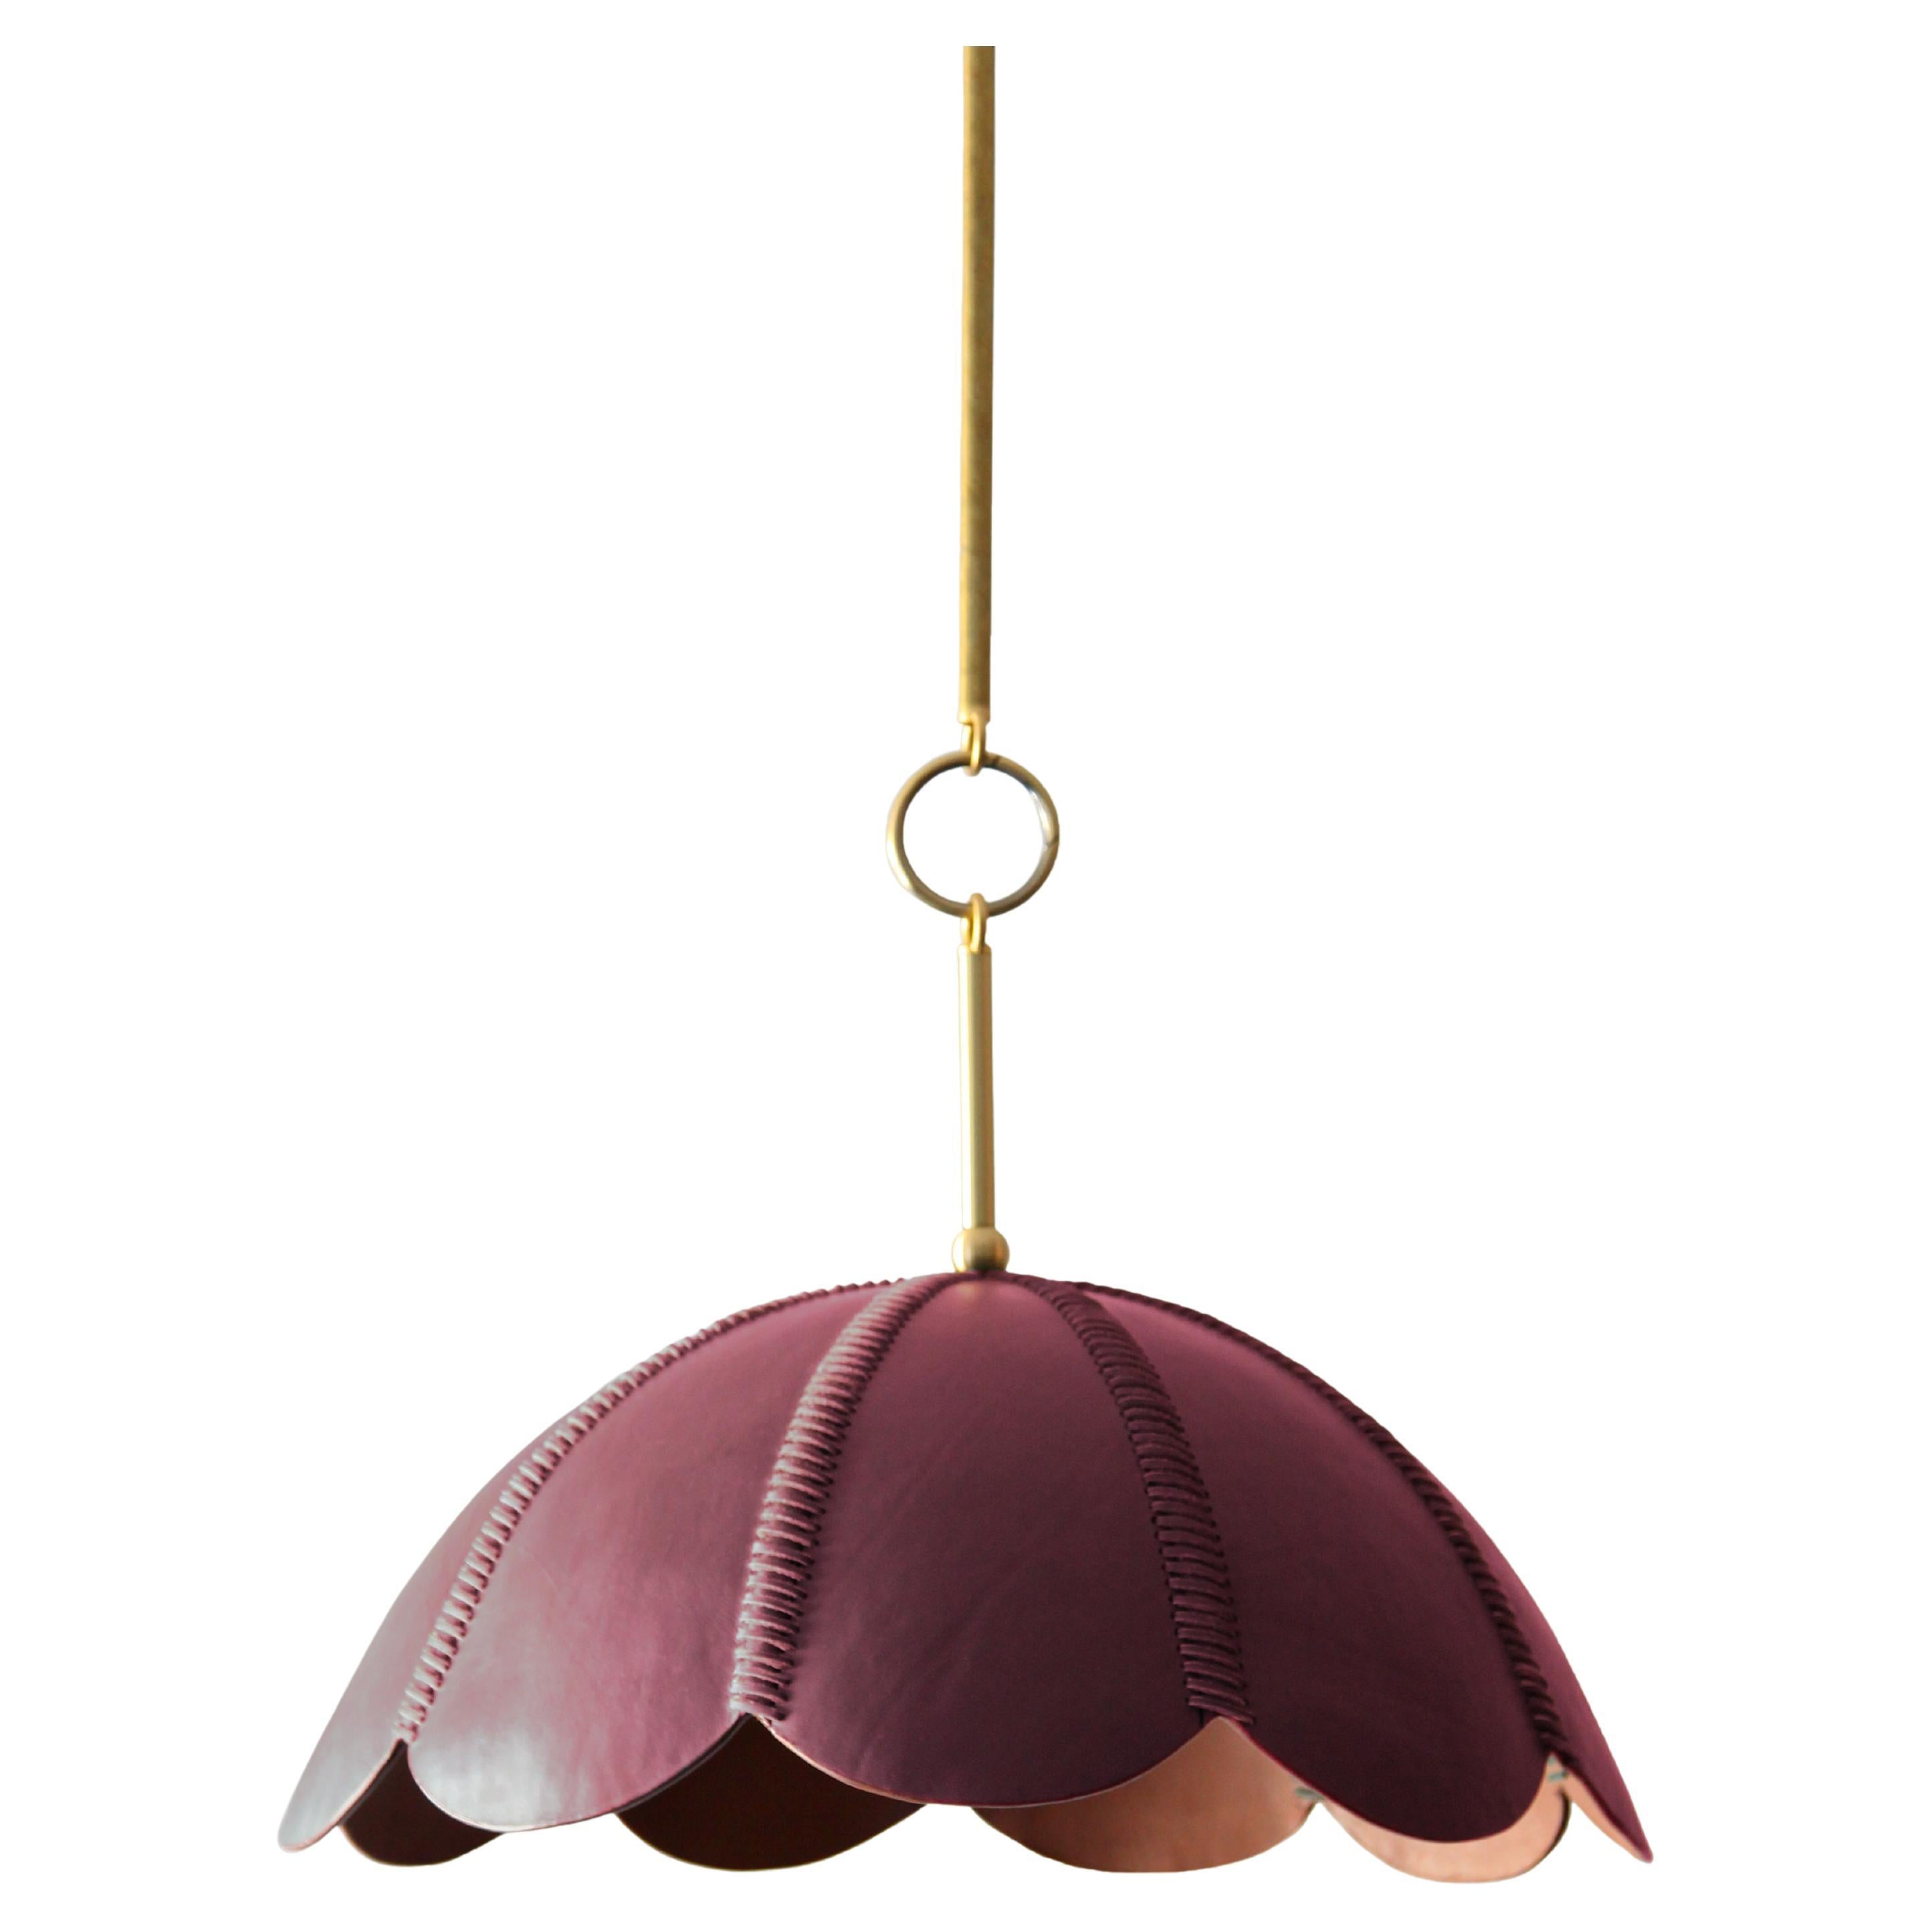 Leather Pendant Light in Berry, Capa II, Talabartero Collection Saddle Lamp